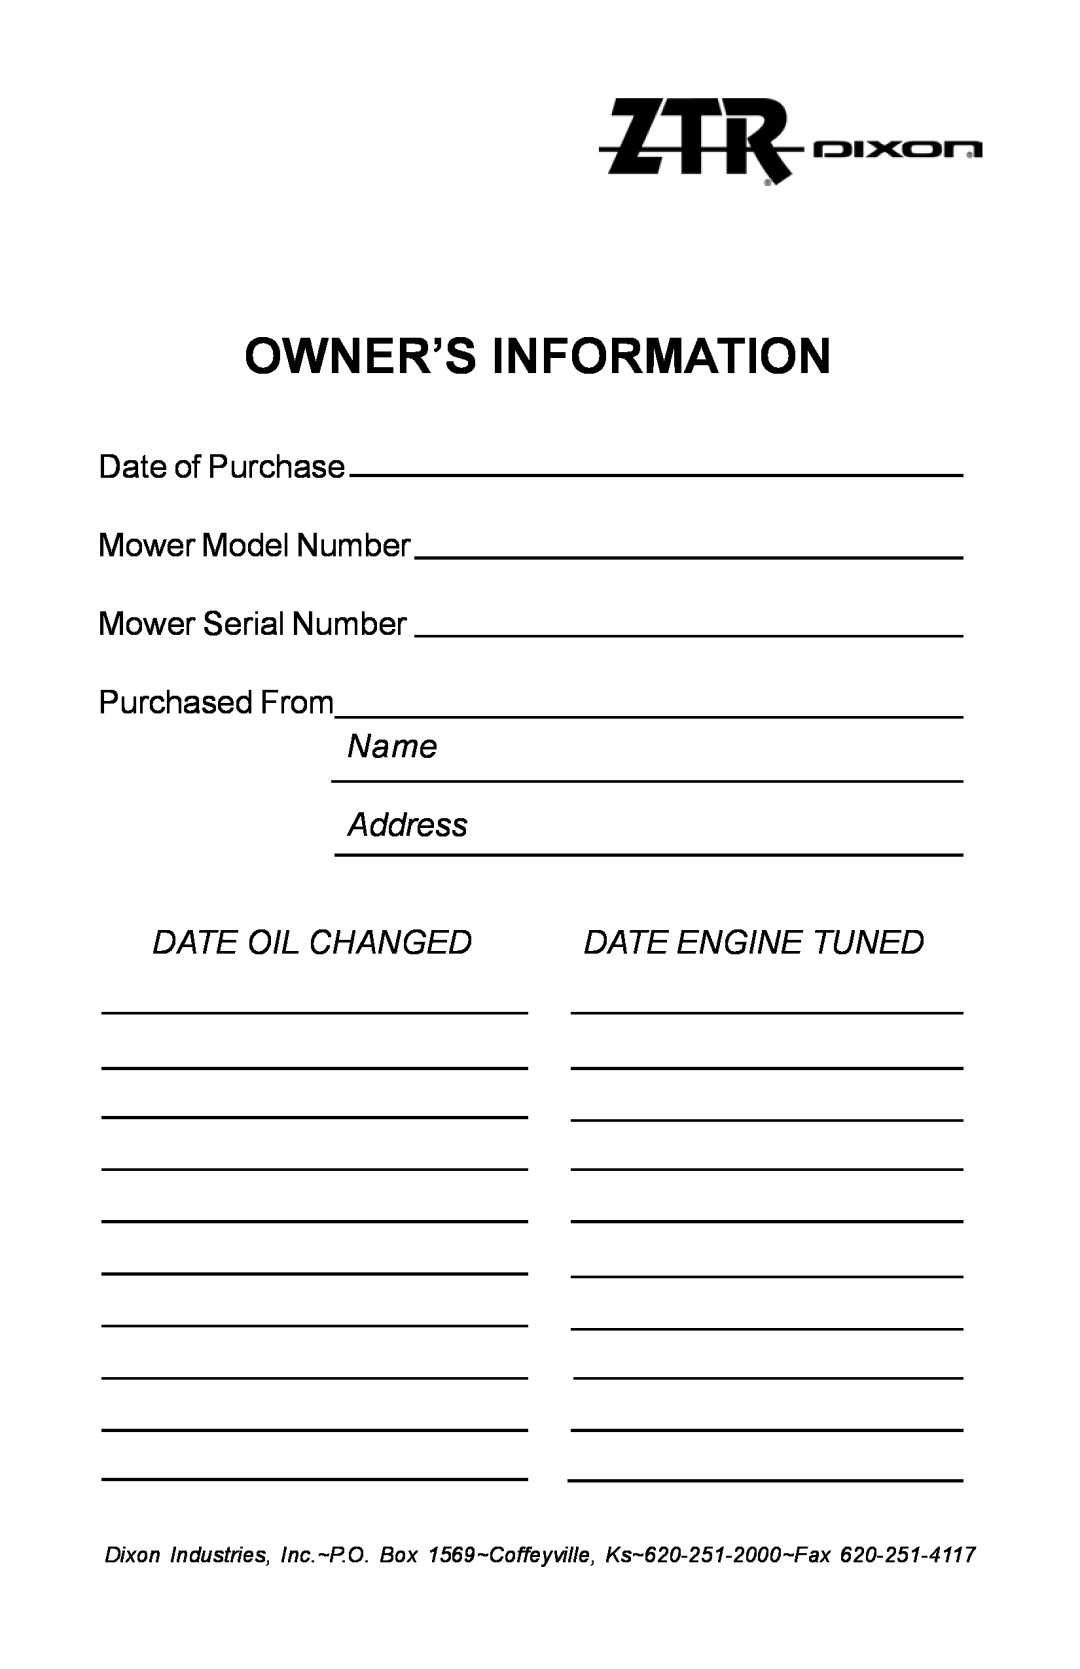 Dixon 30 manual Owner’S Information, Date of Purchase Mower Model Number, Mower Serial Number Purchased From, Name Address 